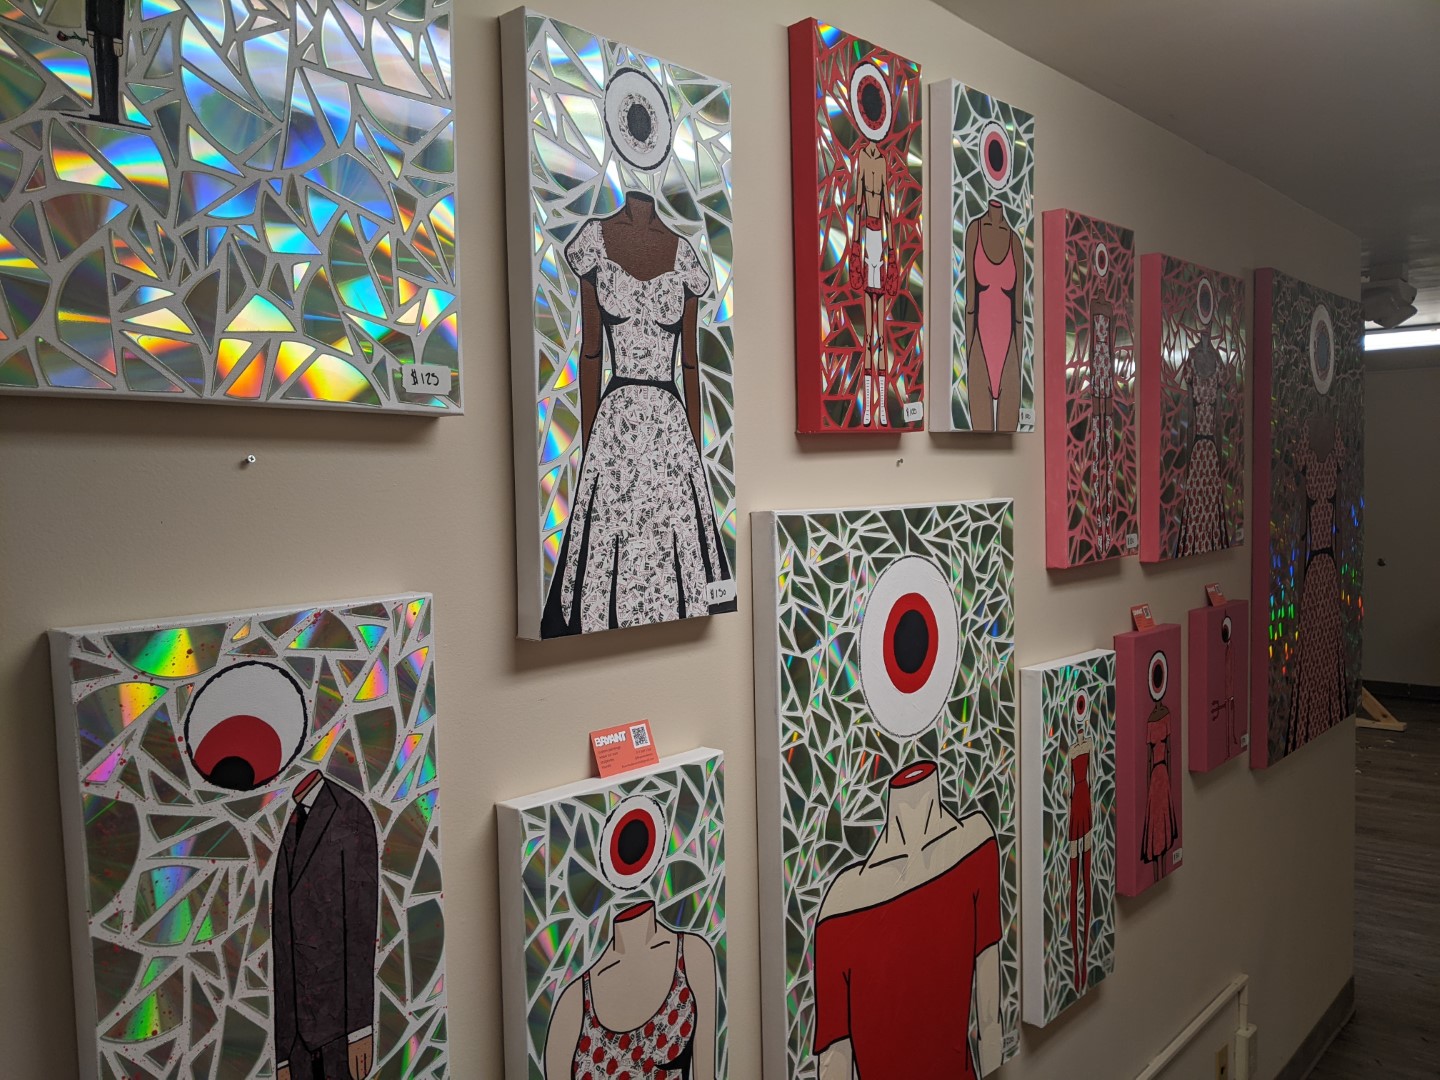 An art display of bodies with eyeballs for heads. They are painted and the background is small geometric shapes in holographic paper.